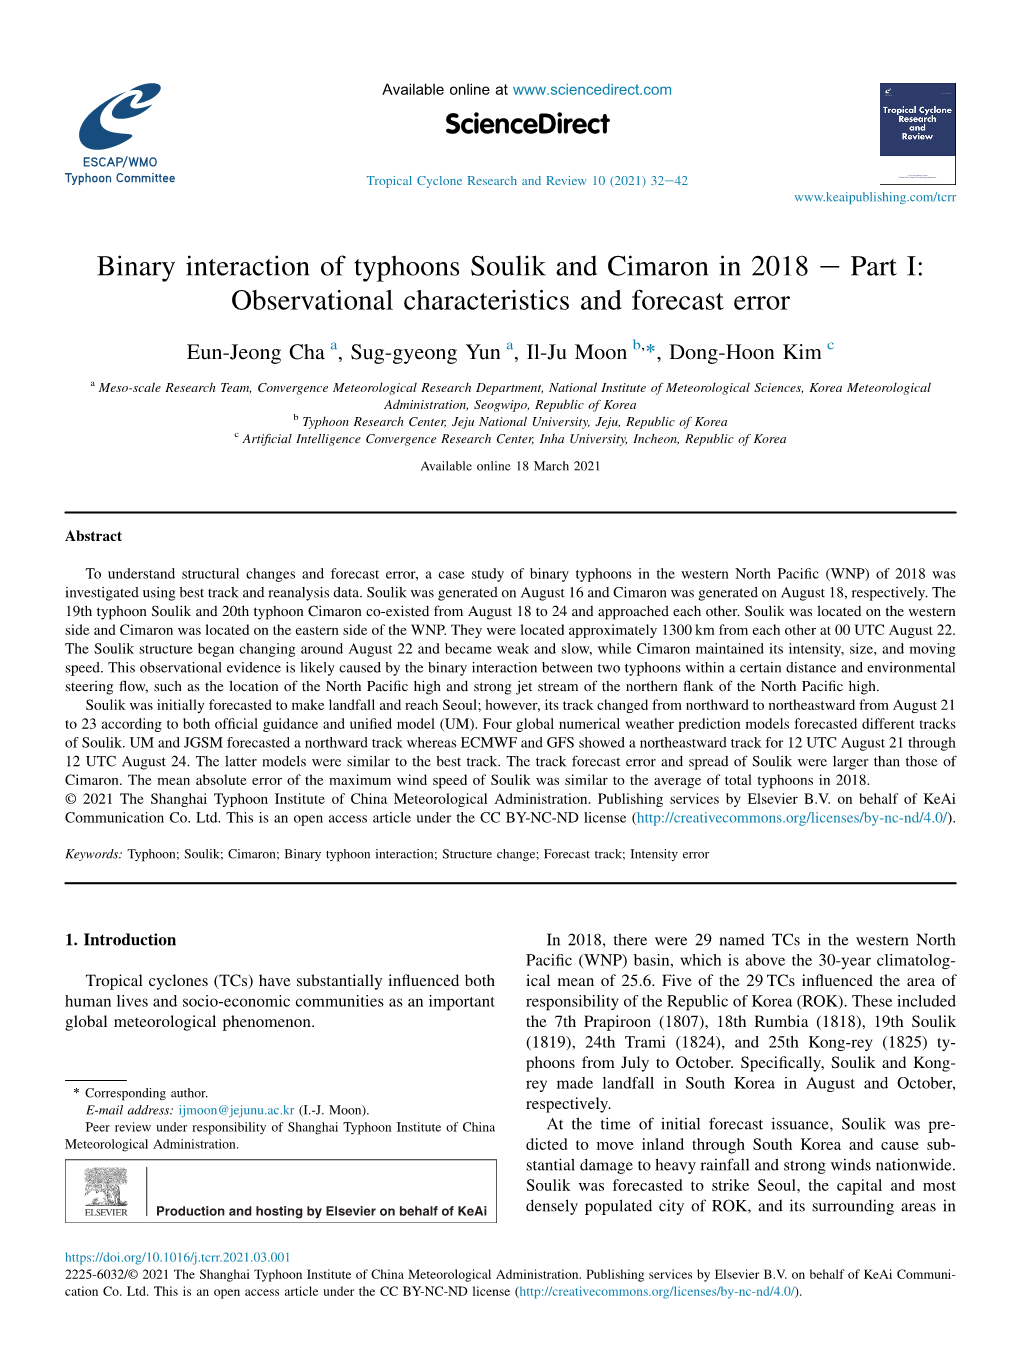 Binary Interaction of Typhoons Soulik and Cimaron in 2018 E Part I: Observational Characteristics and Forecast Error